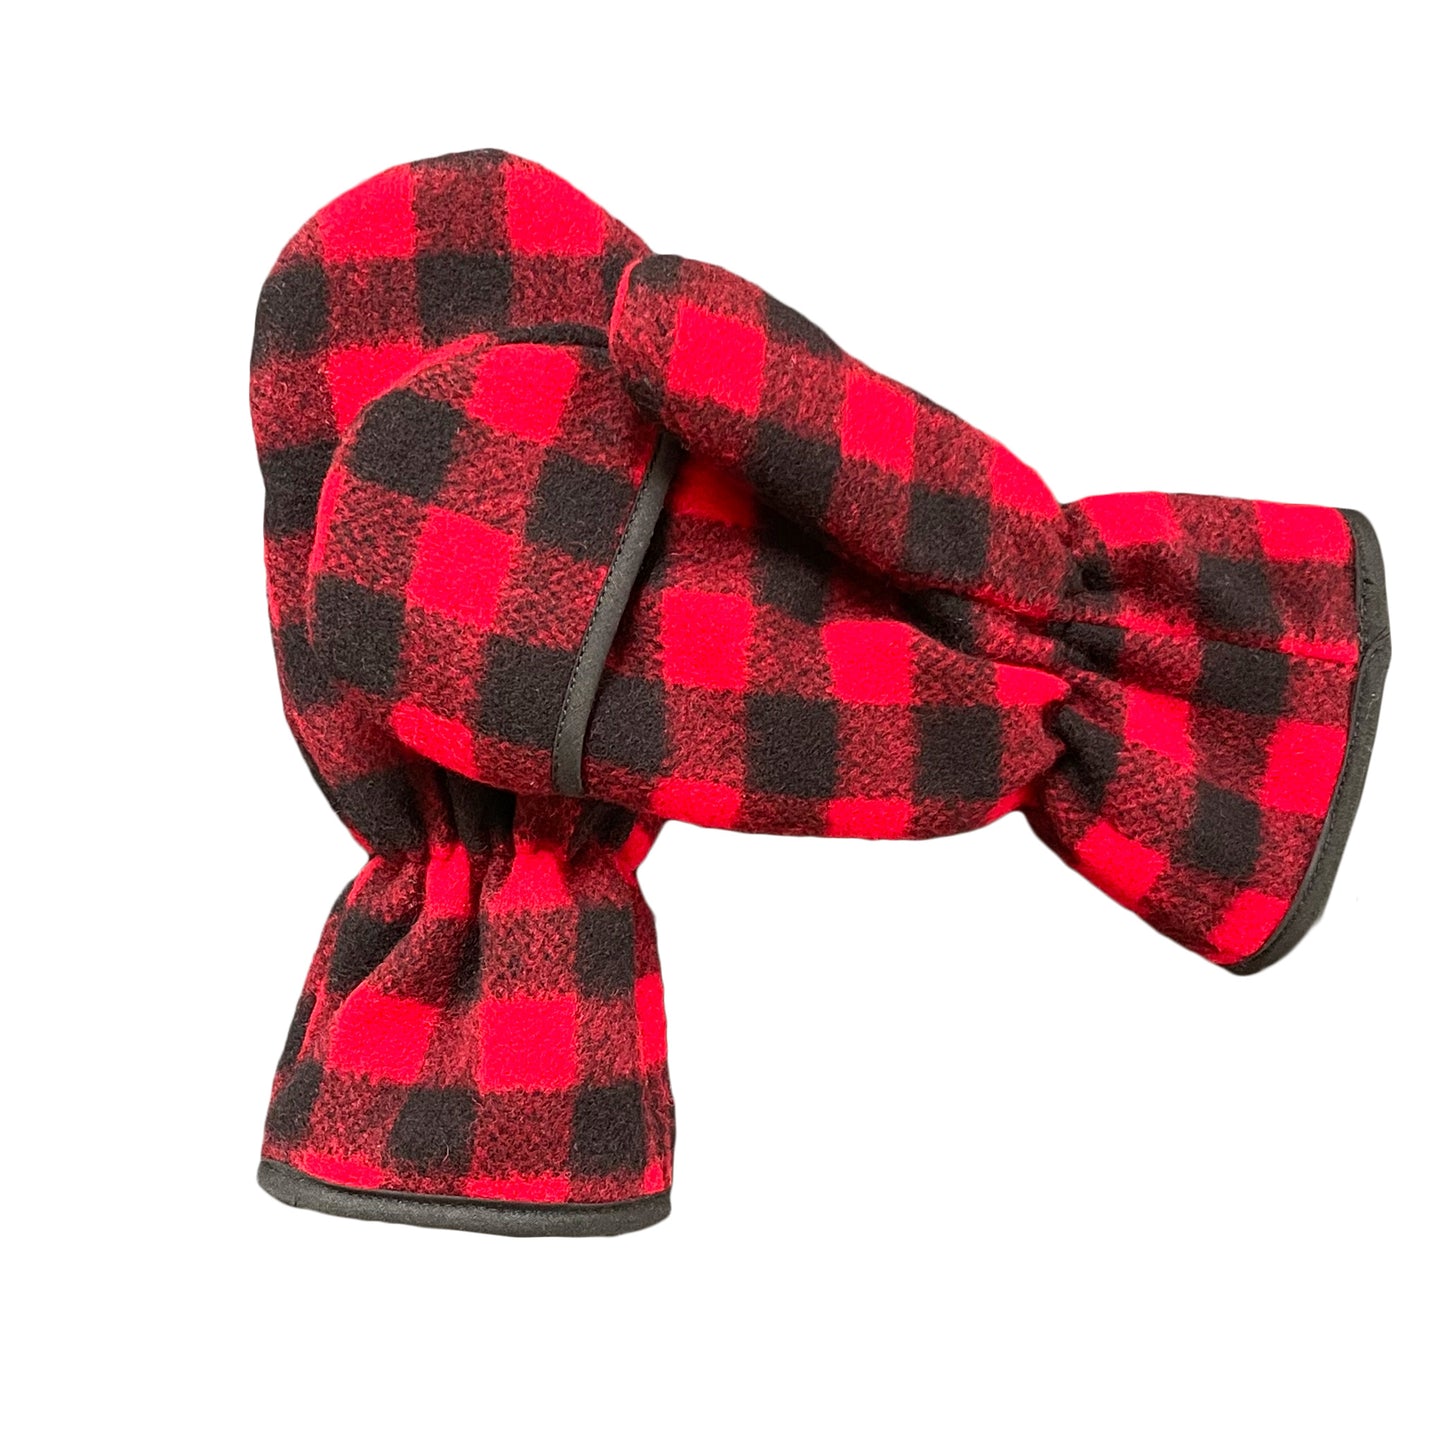 Johnson Woolen Mills Spruce red and black 1" buffalo check hunter mittens 